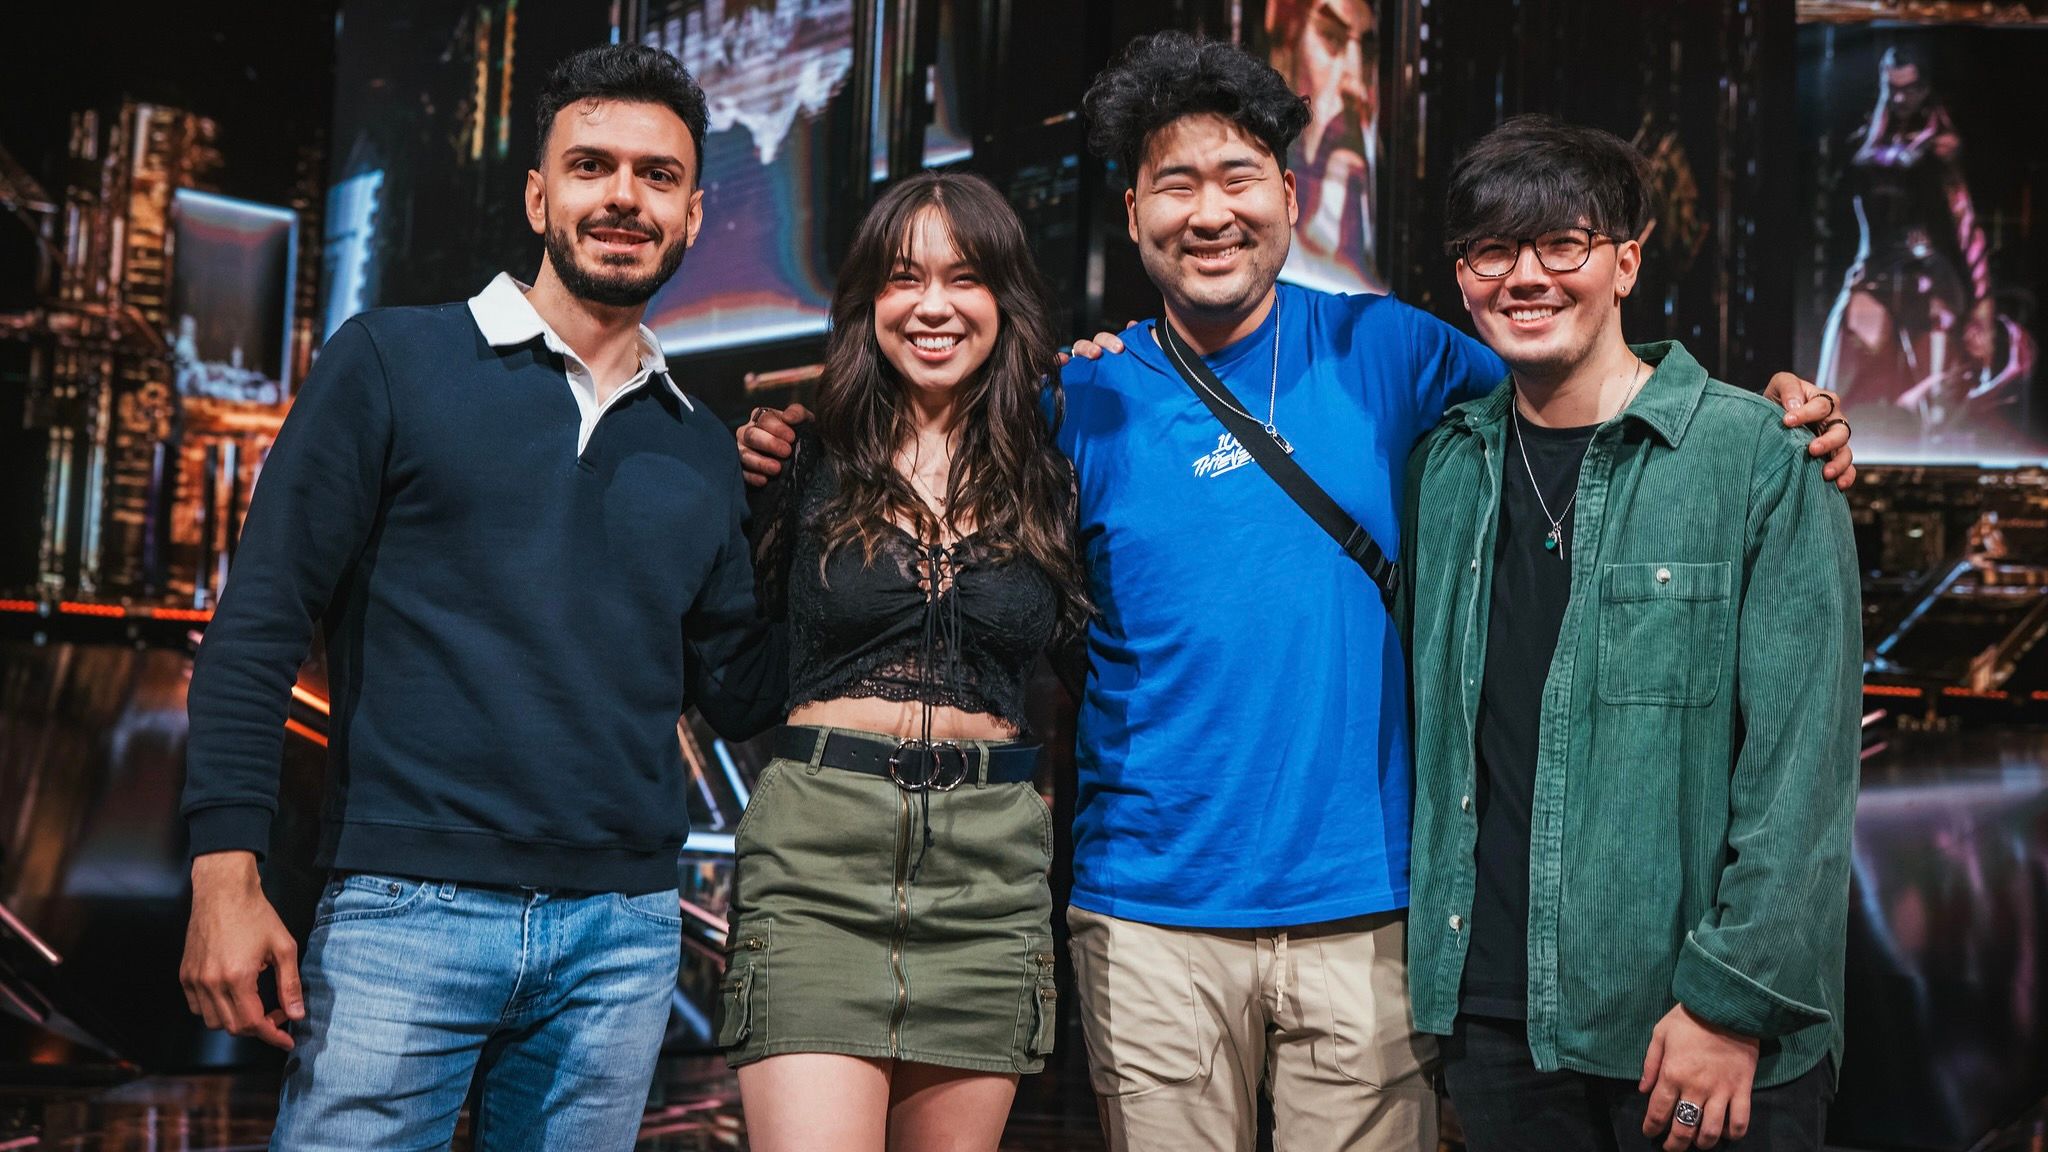 OfflineTV's Scarra hints three streamer boxing events could happen in 2023  - Dot Esports